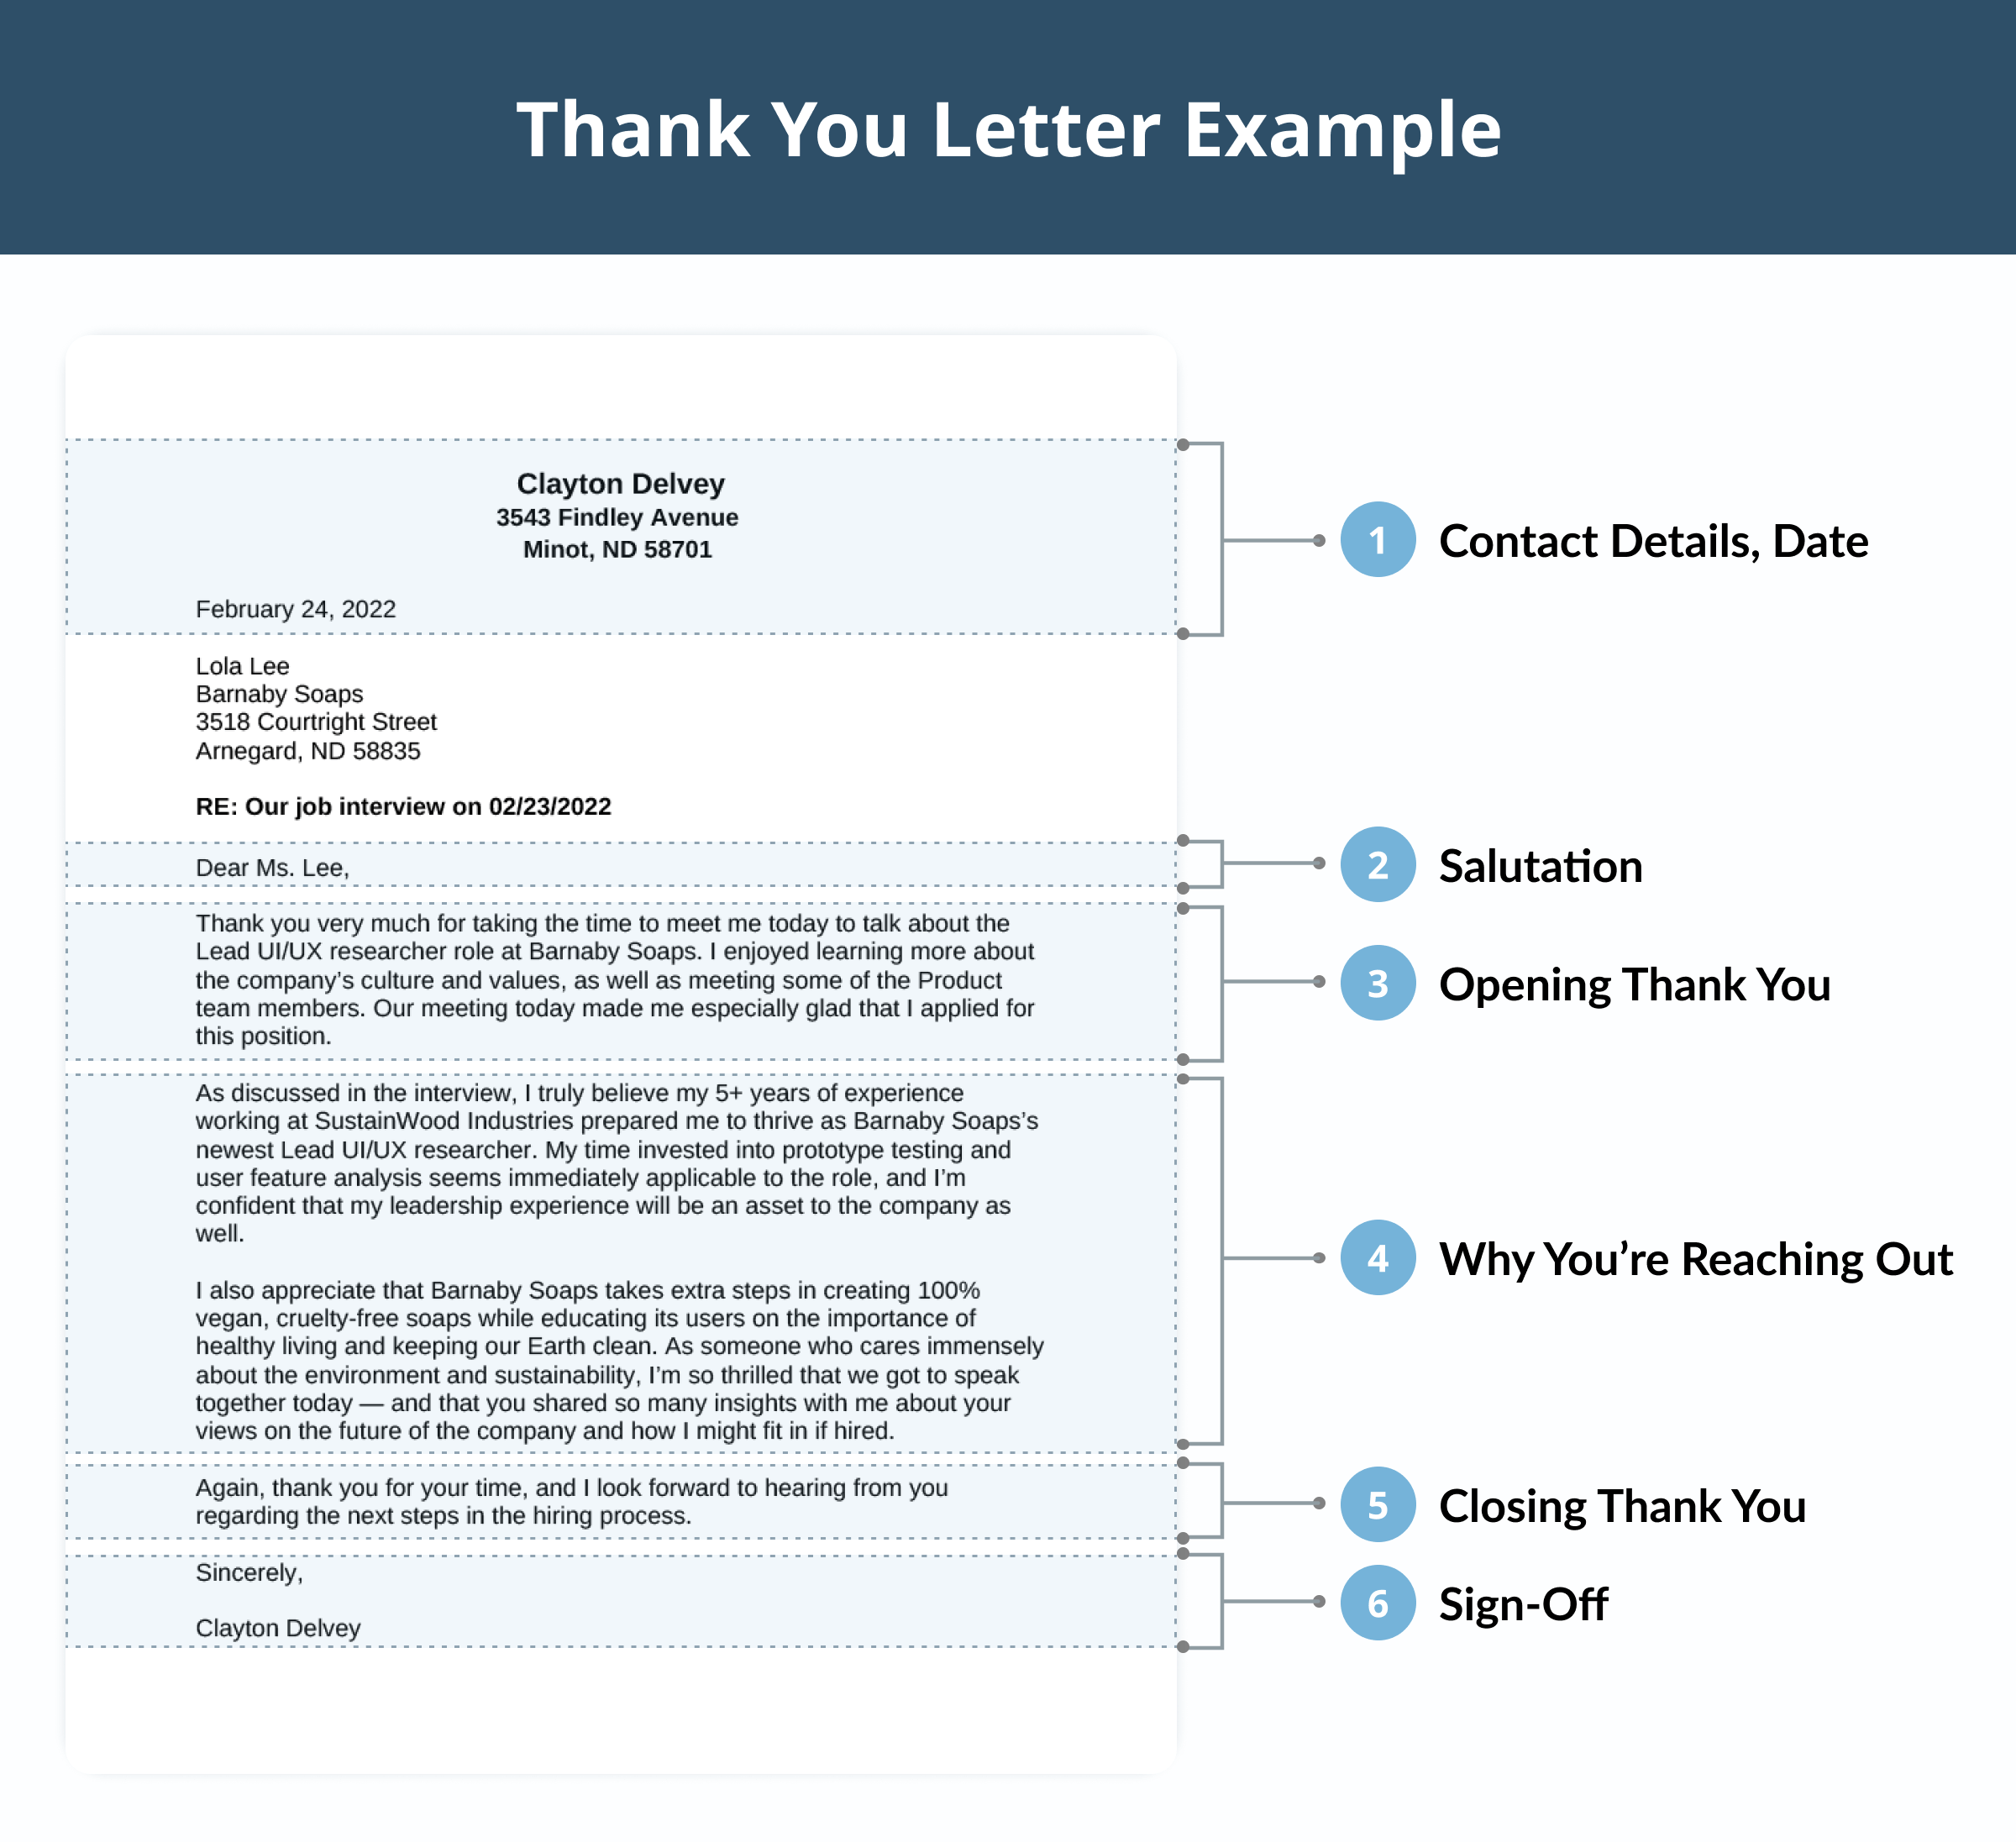 An infographic showing what a thank you letter example looks like